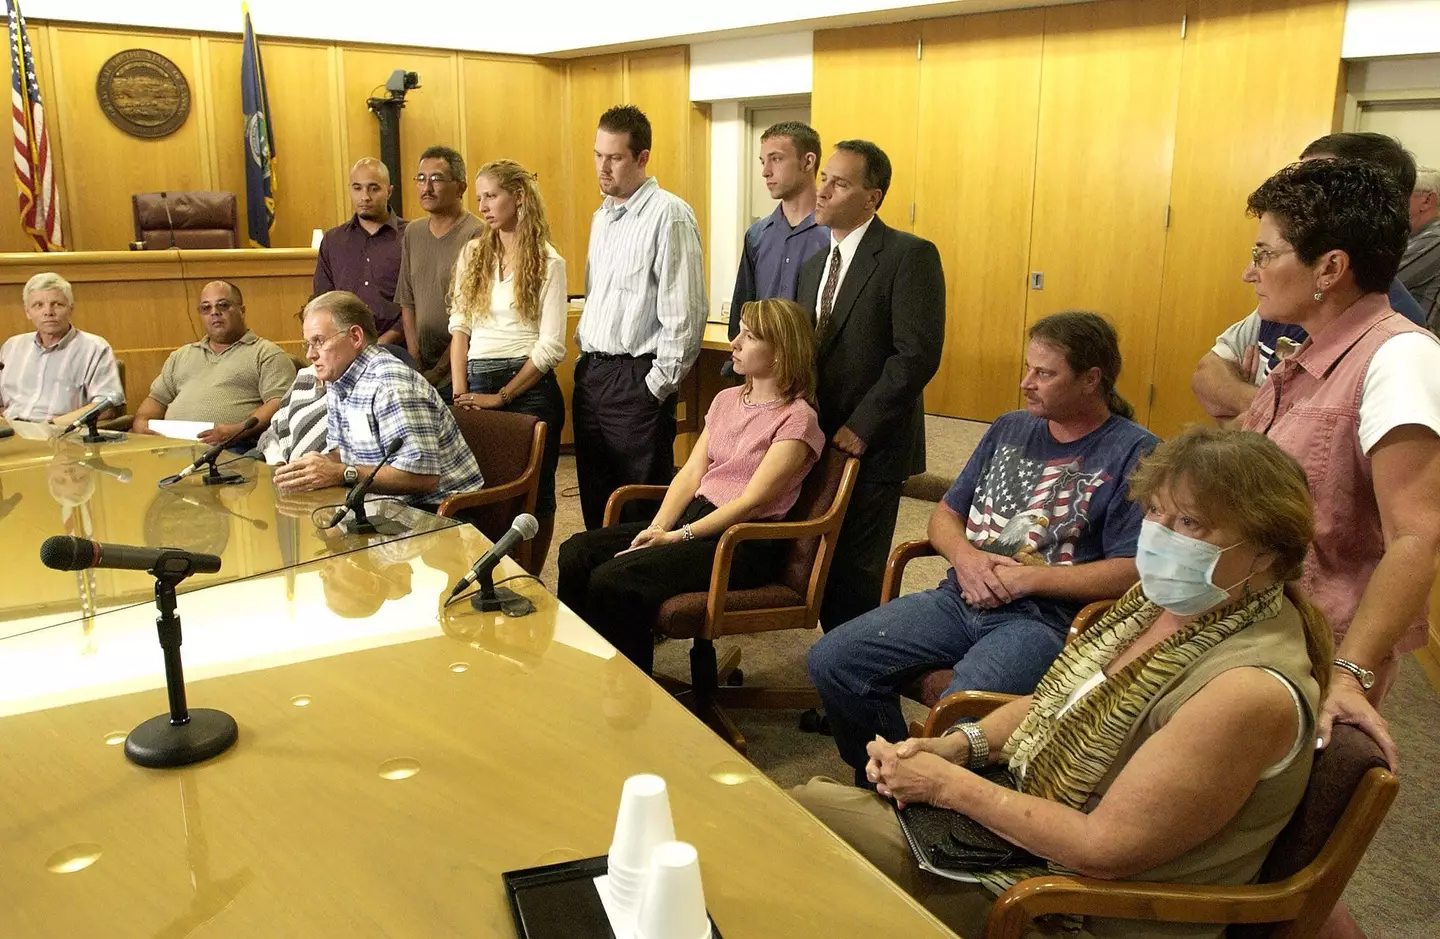 Victims' families gather for a news conference after BTK serial killer Dennis Rader was sentenced in 2005.